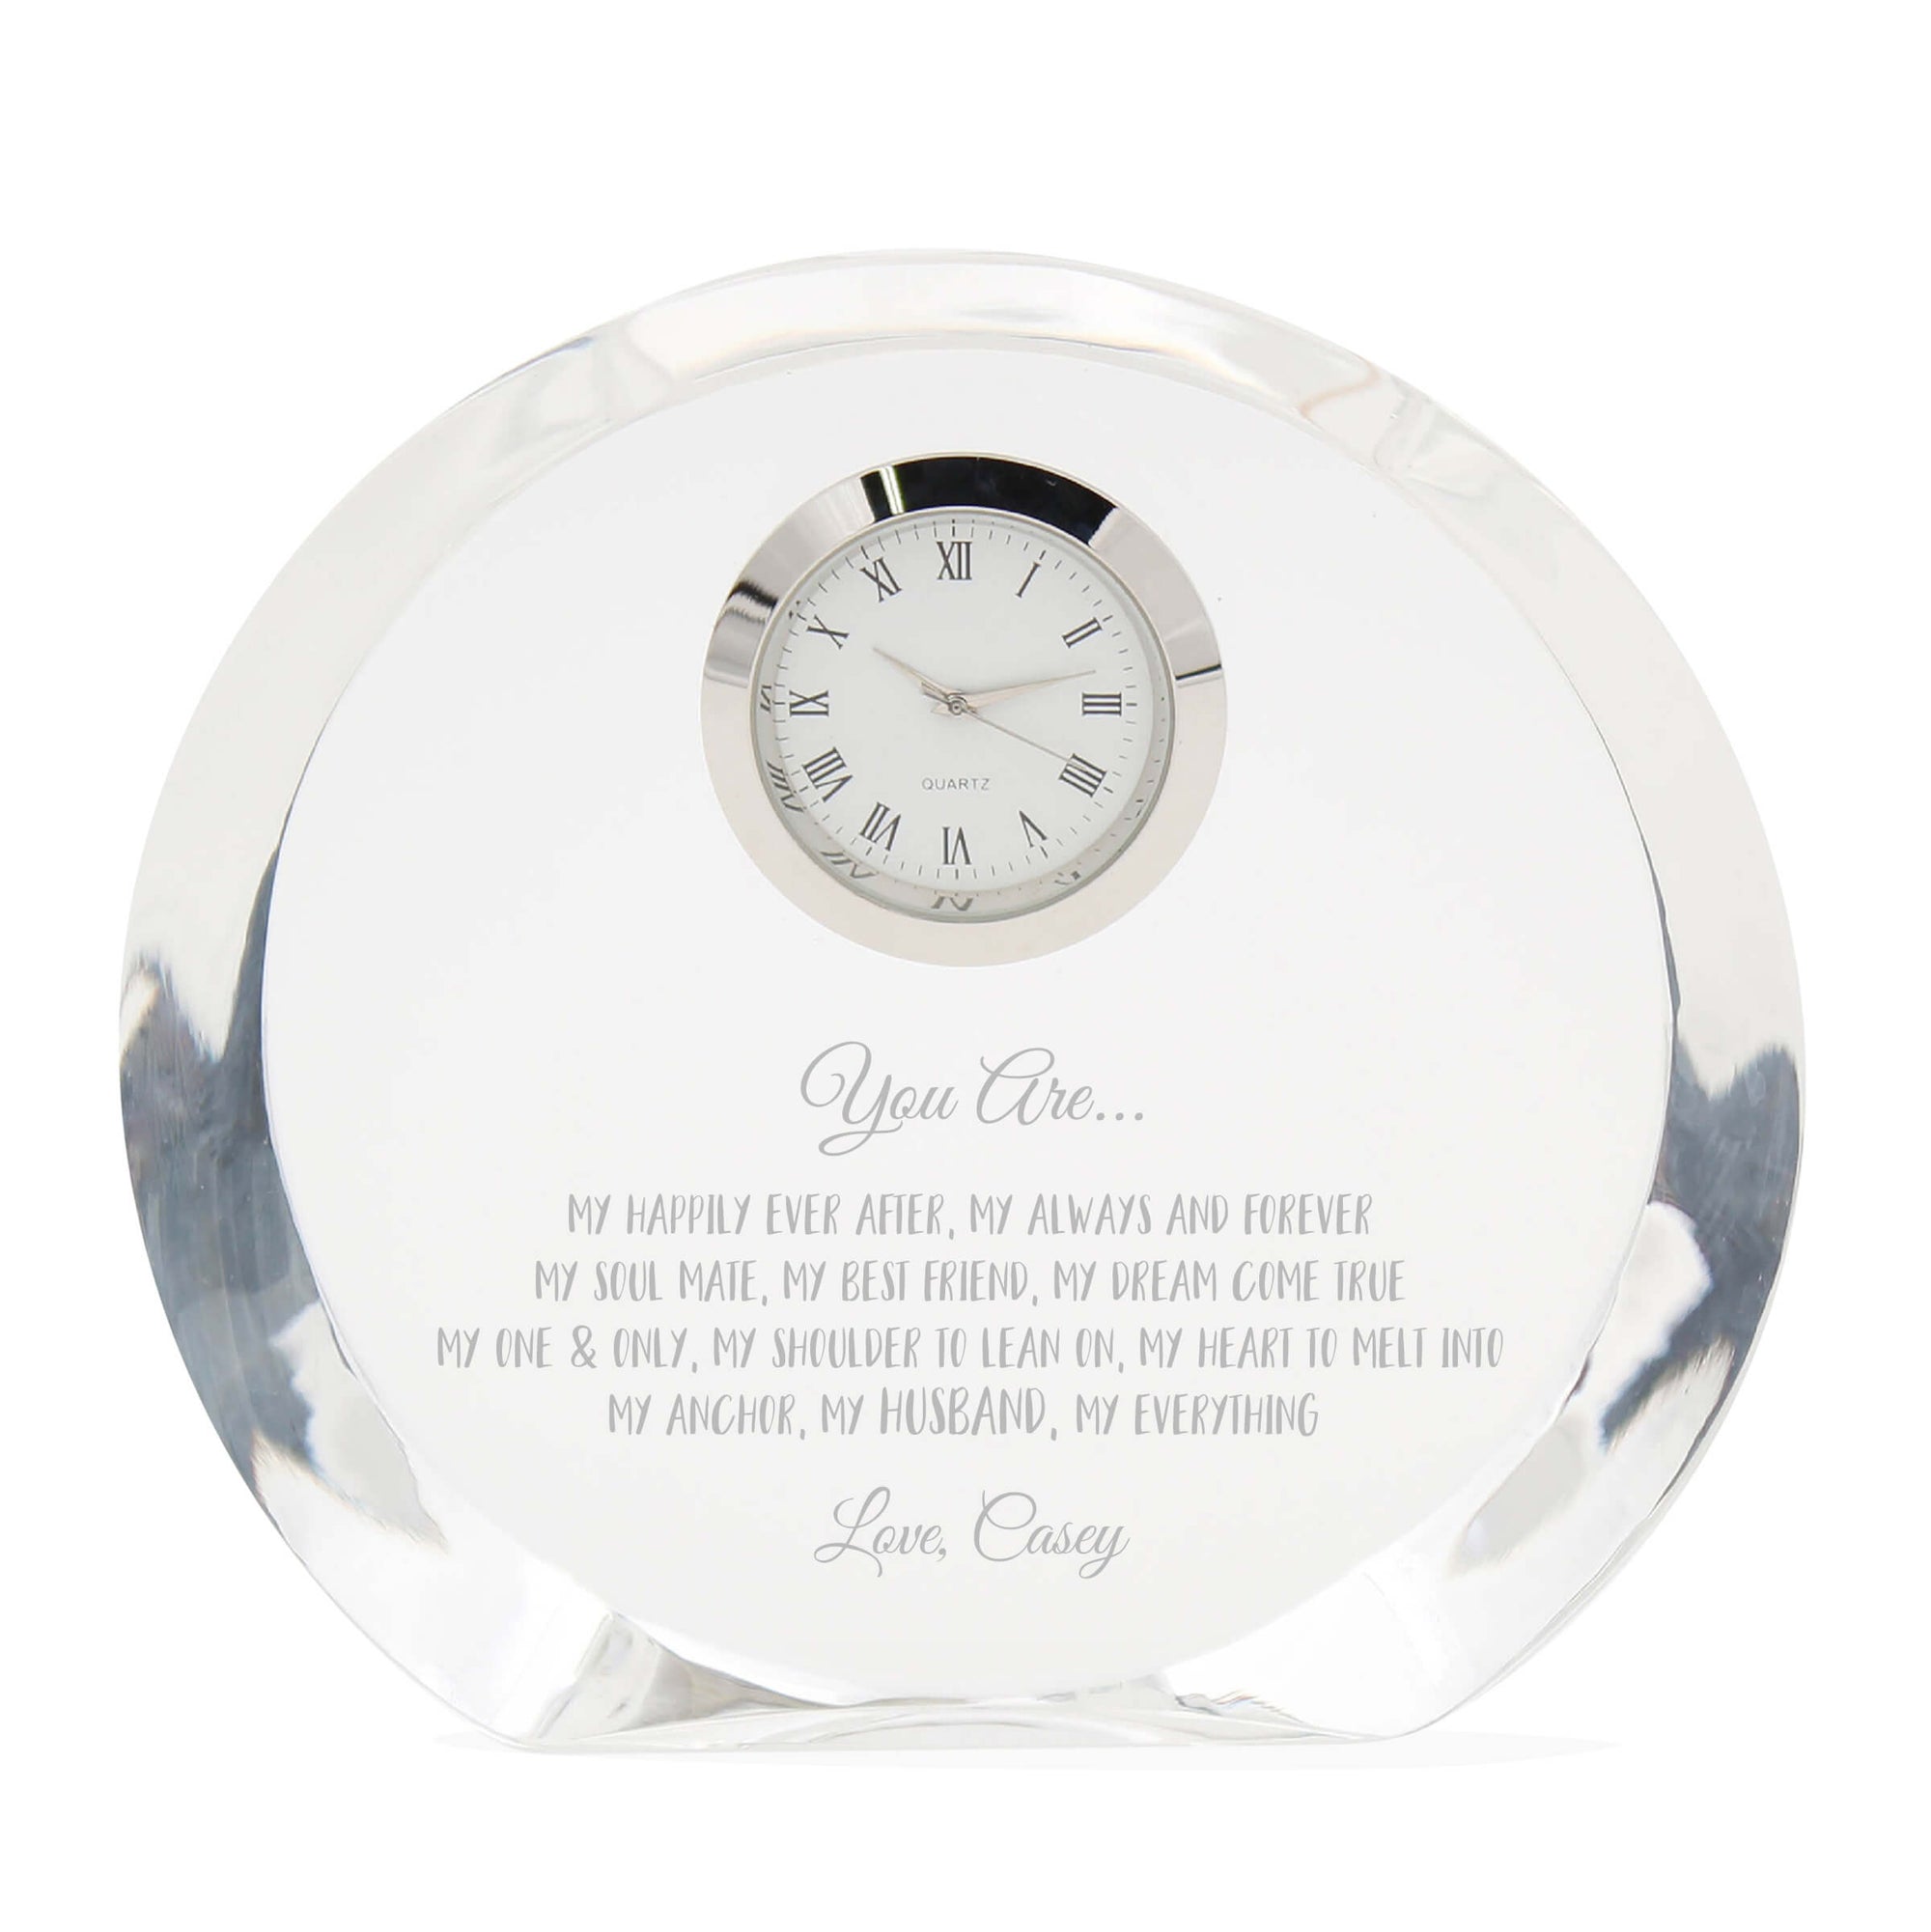 My Happily Ever After Crystal Clock